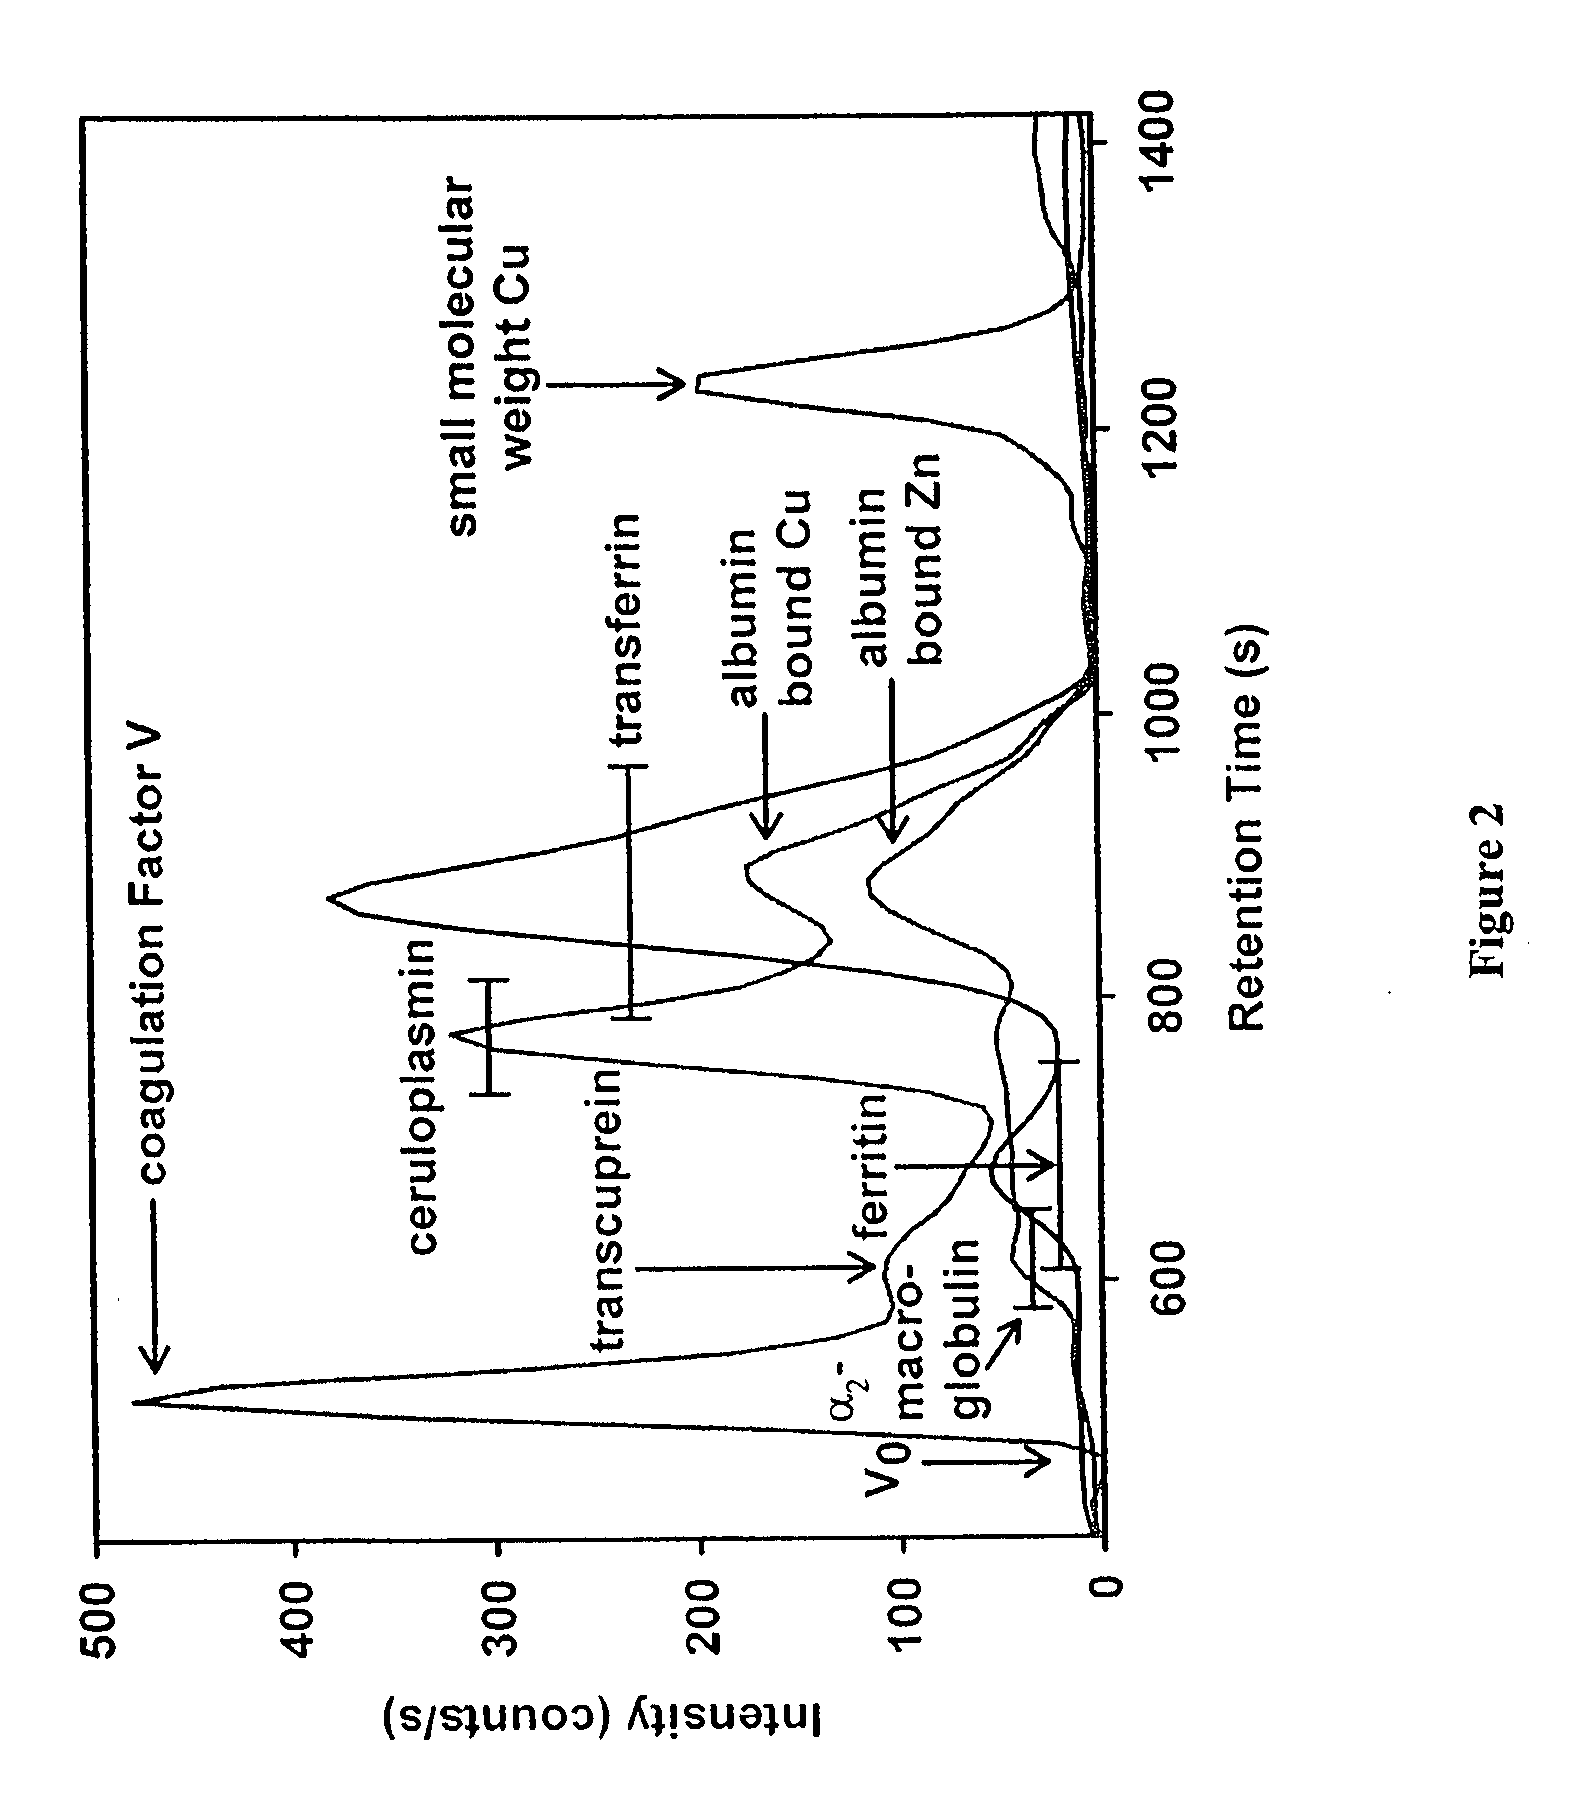 Method for assessing trace element related disorders in blood plasma